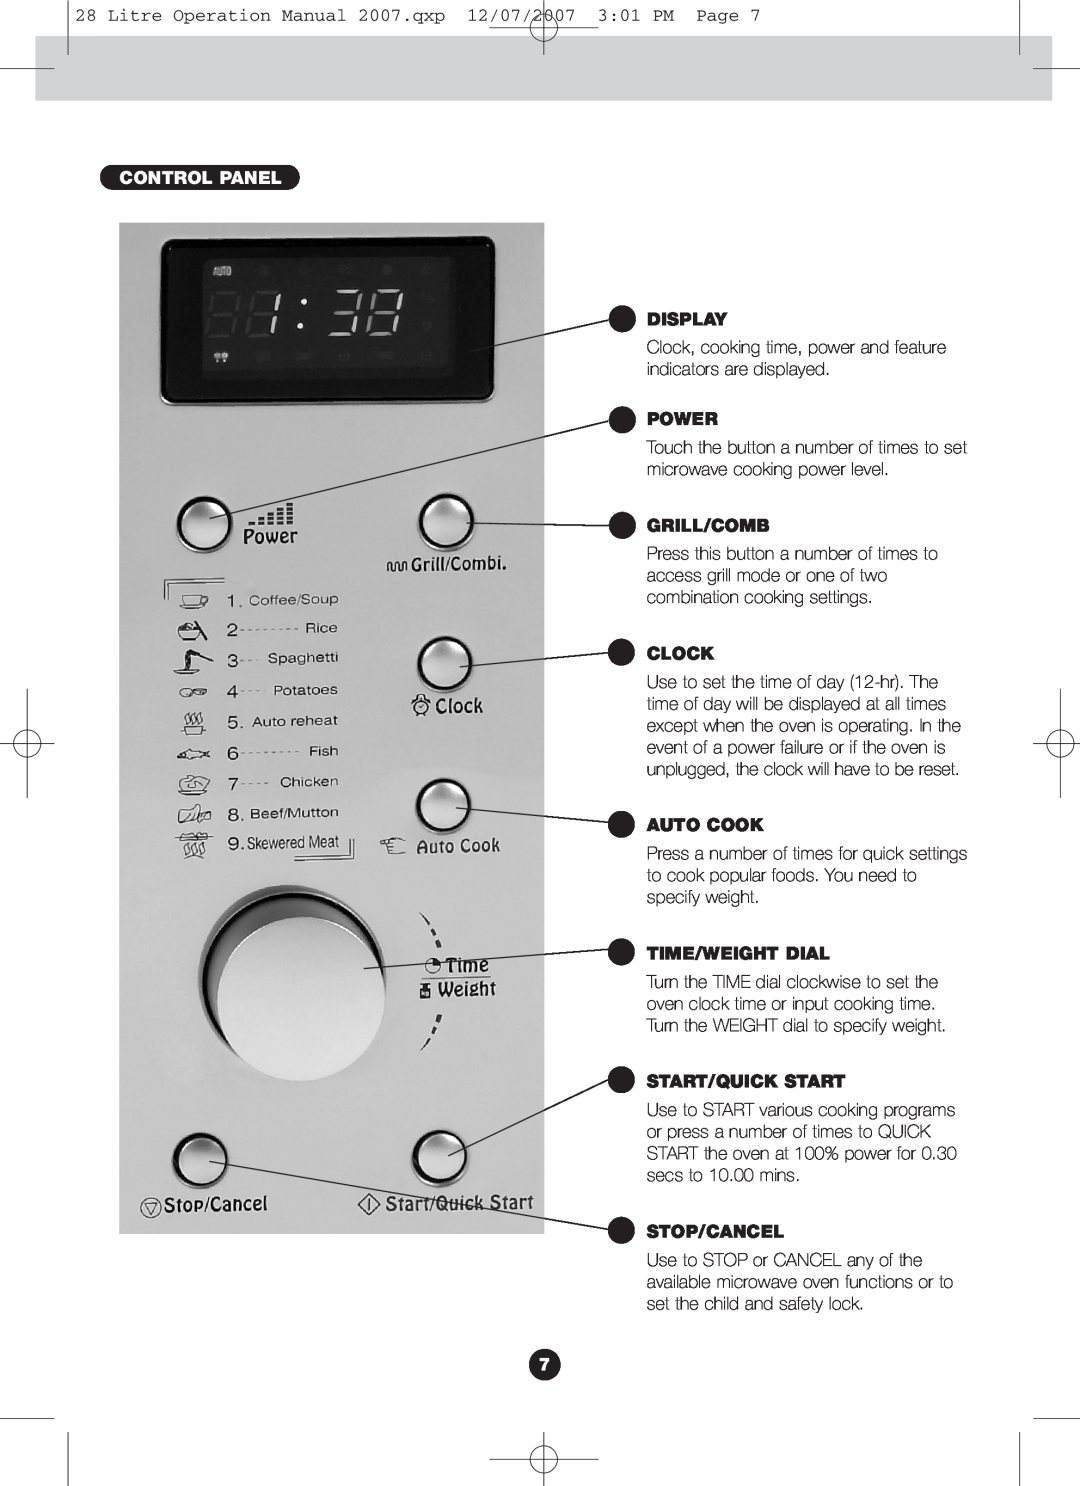 Blanco BMO280X Control Panel, Display, Power, Grill/Comb, Clock, Auto Cook, Time/Weight Dial, Start/Quick Start 